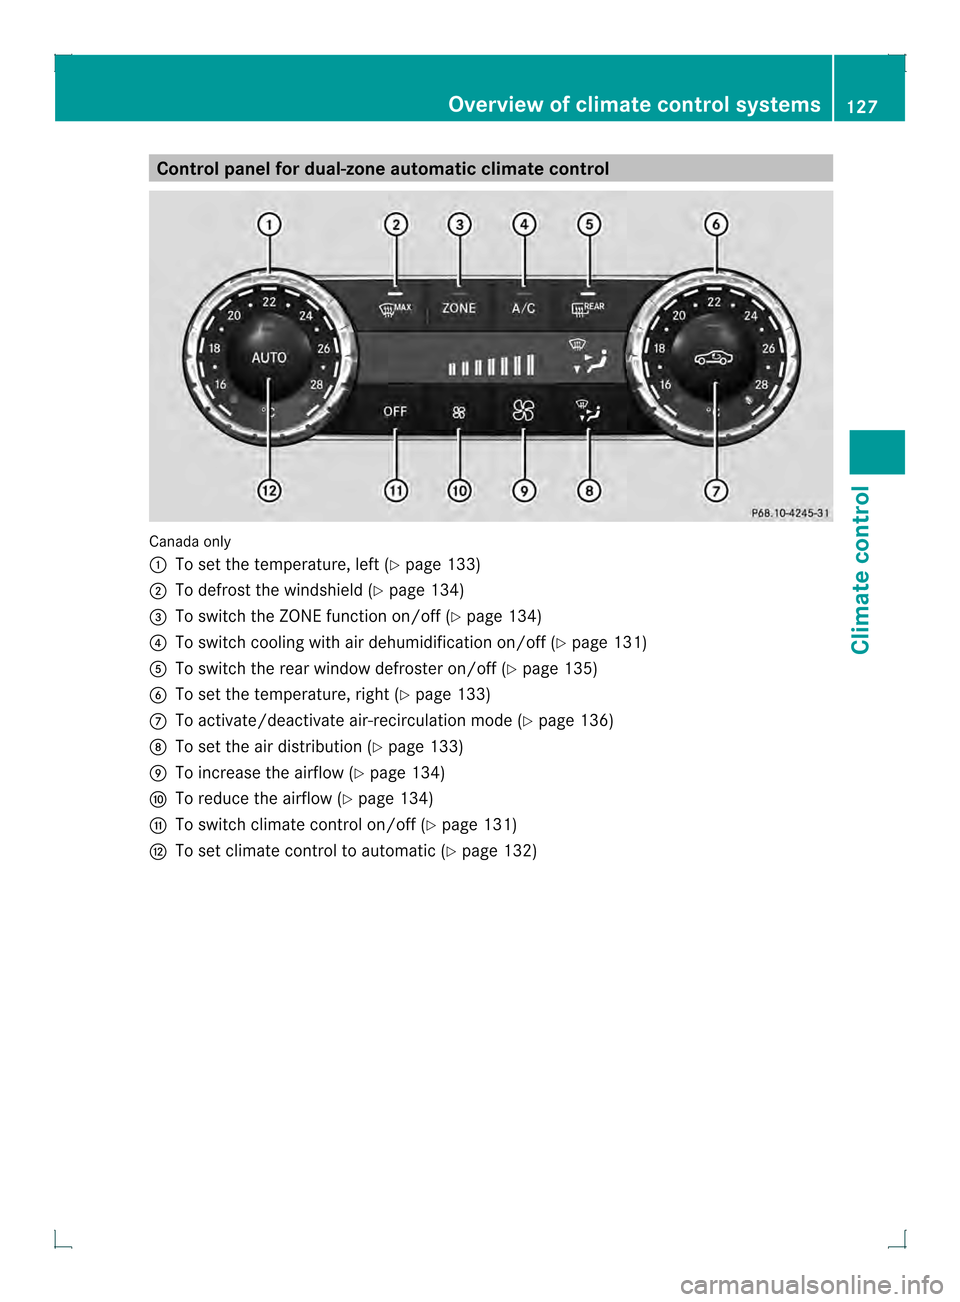 MERCEDES-BENZ GLK-Class 2013 X204 User Guide Control panel for dual-zone automatic climate control
Canada only
0002
To set the temperature, left (Y page 133)
0003 To defros tthe windshield (Y page 134)
0021 To switch the ZONE function on/off (Y 